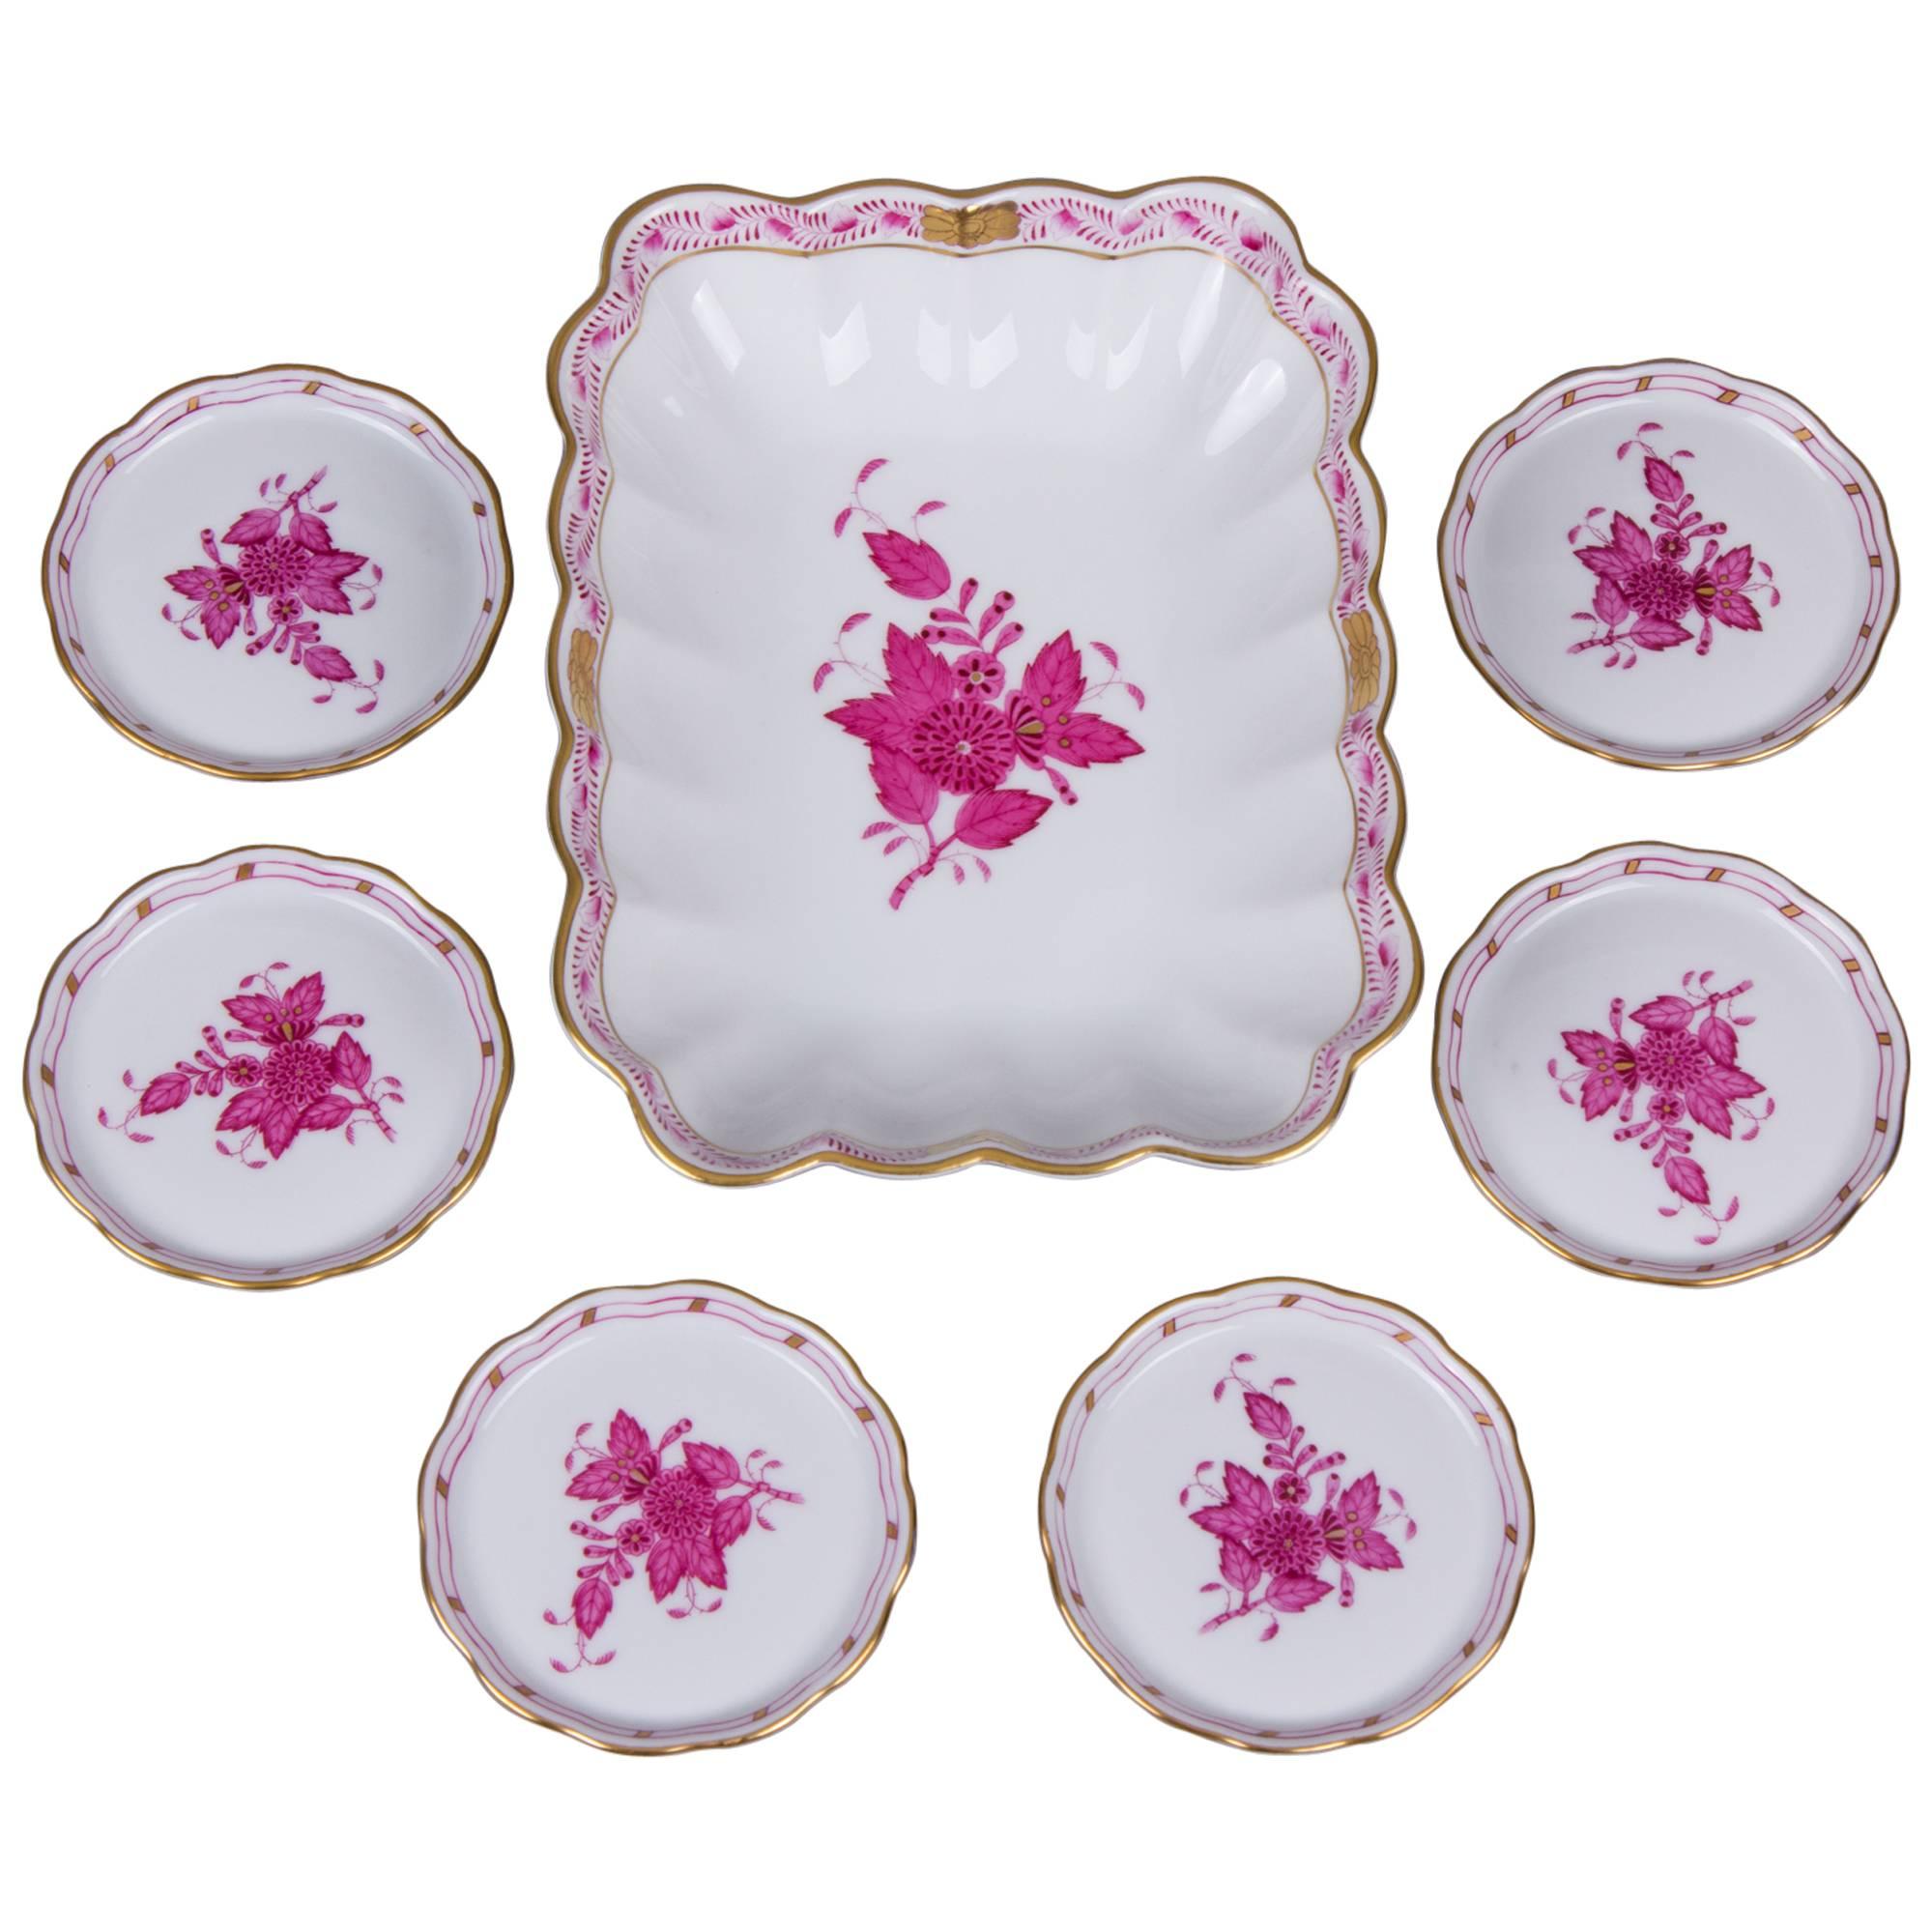 Herend Chinese Bouquet Raspberry Hazelnut Set for Six Persons, circa 1960